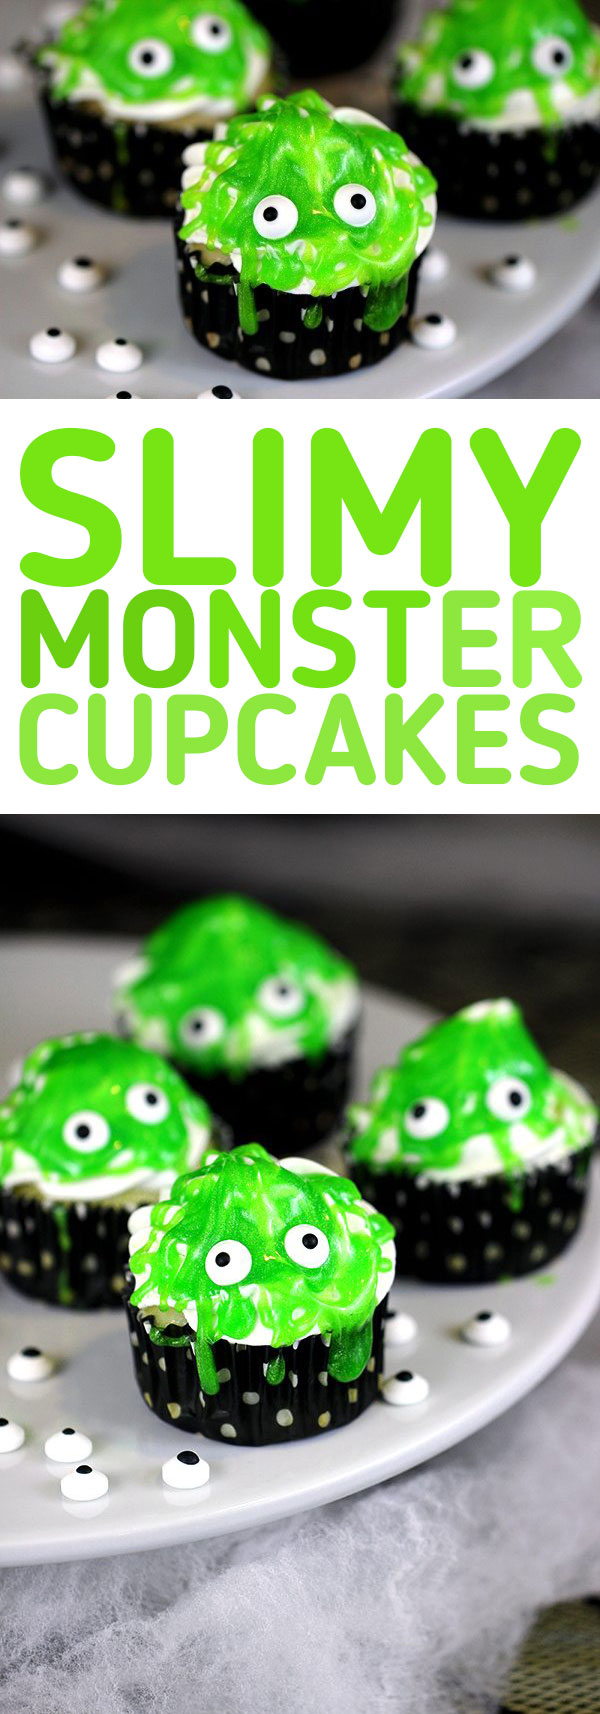 Slimy Monster Cupcakes. Cute and spooky comes together with these super easy cupcakes. Great for Halloween parties and monster theme parties.